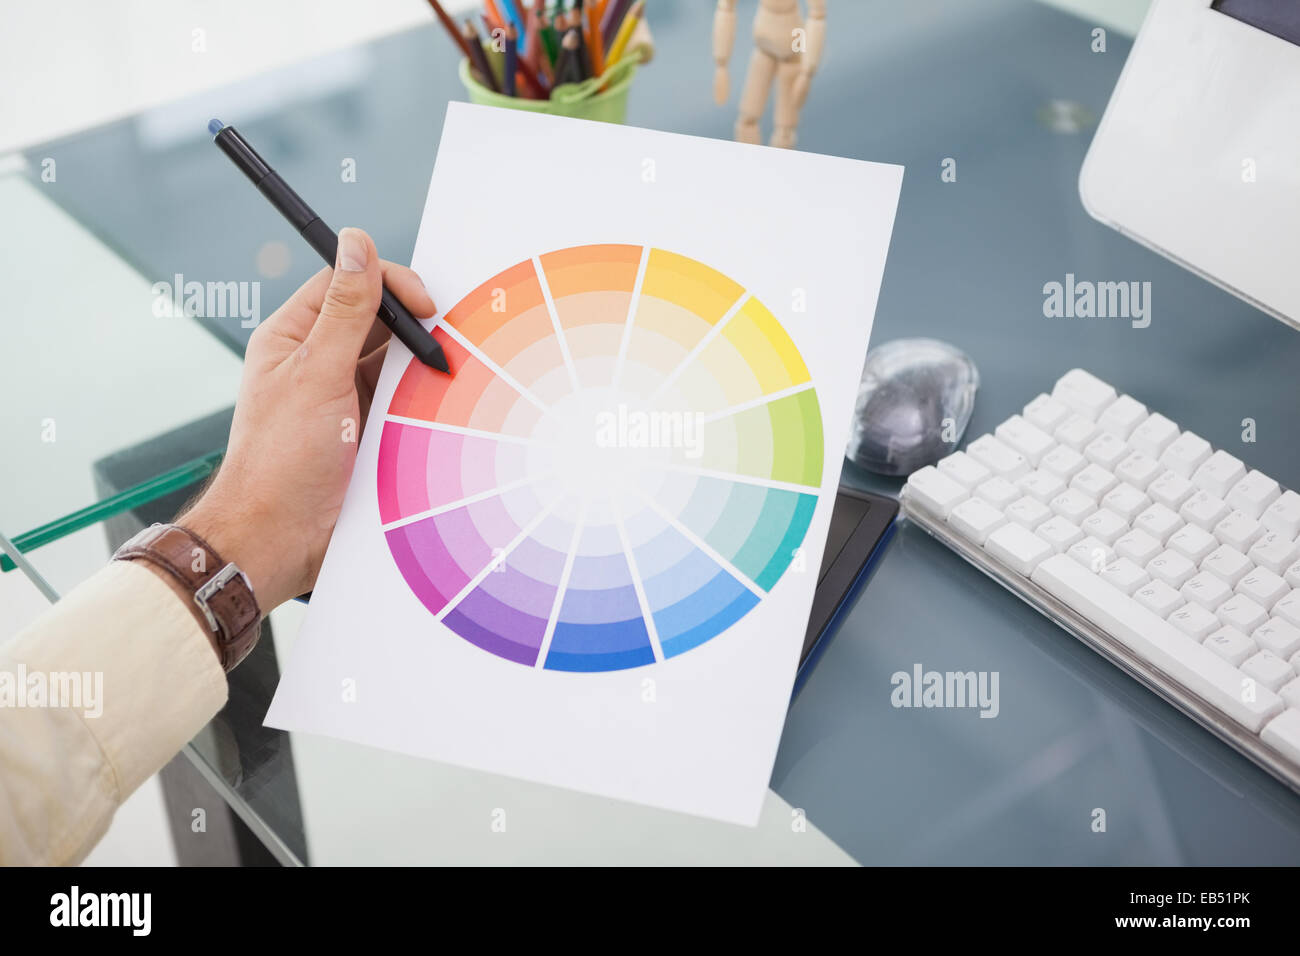 Designer working at desk using a colour wheel Stock Photo